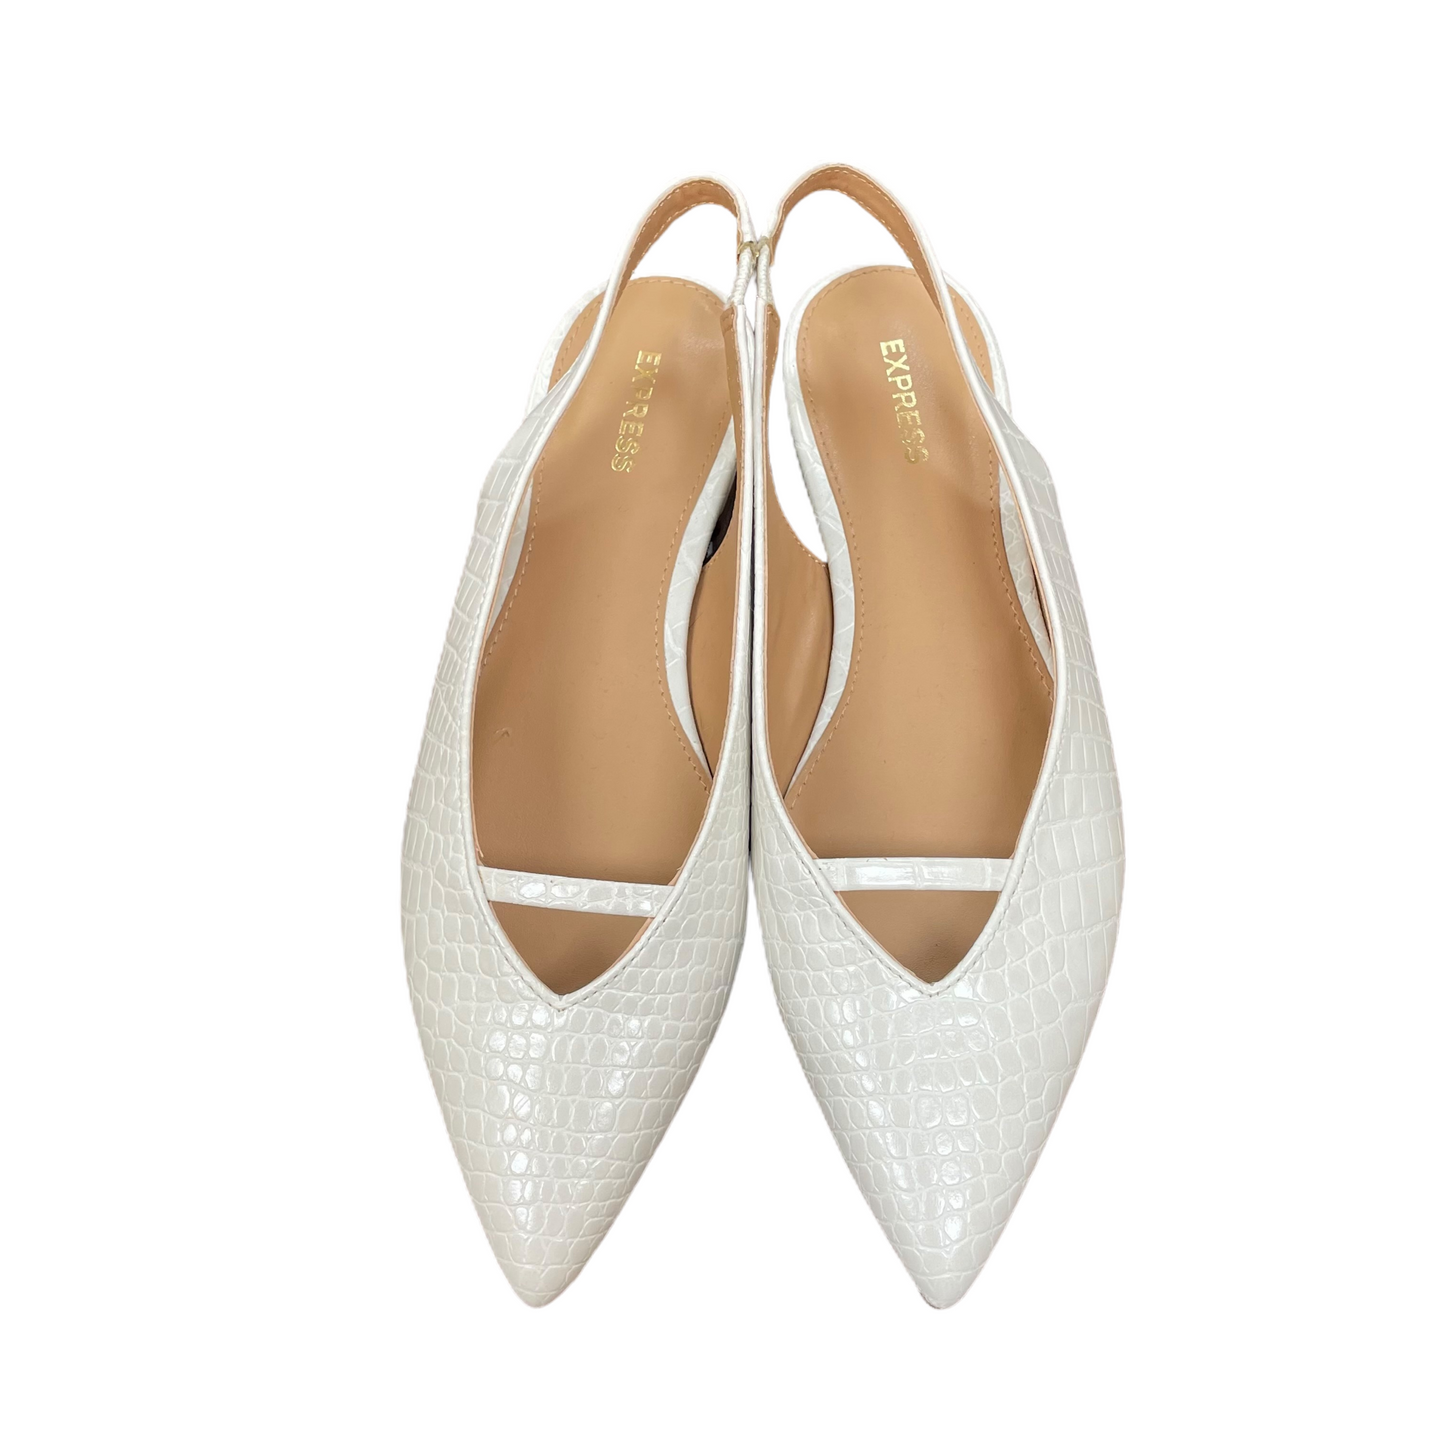 White Shoes Flats By Express, Size: 7